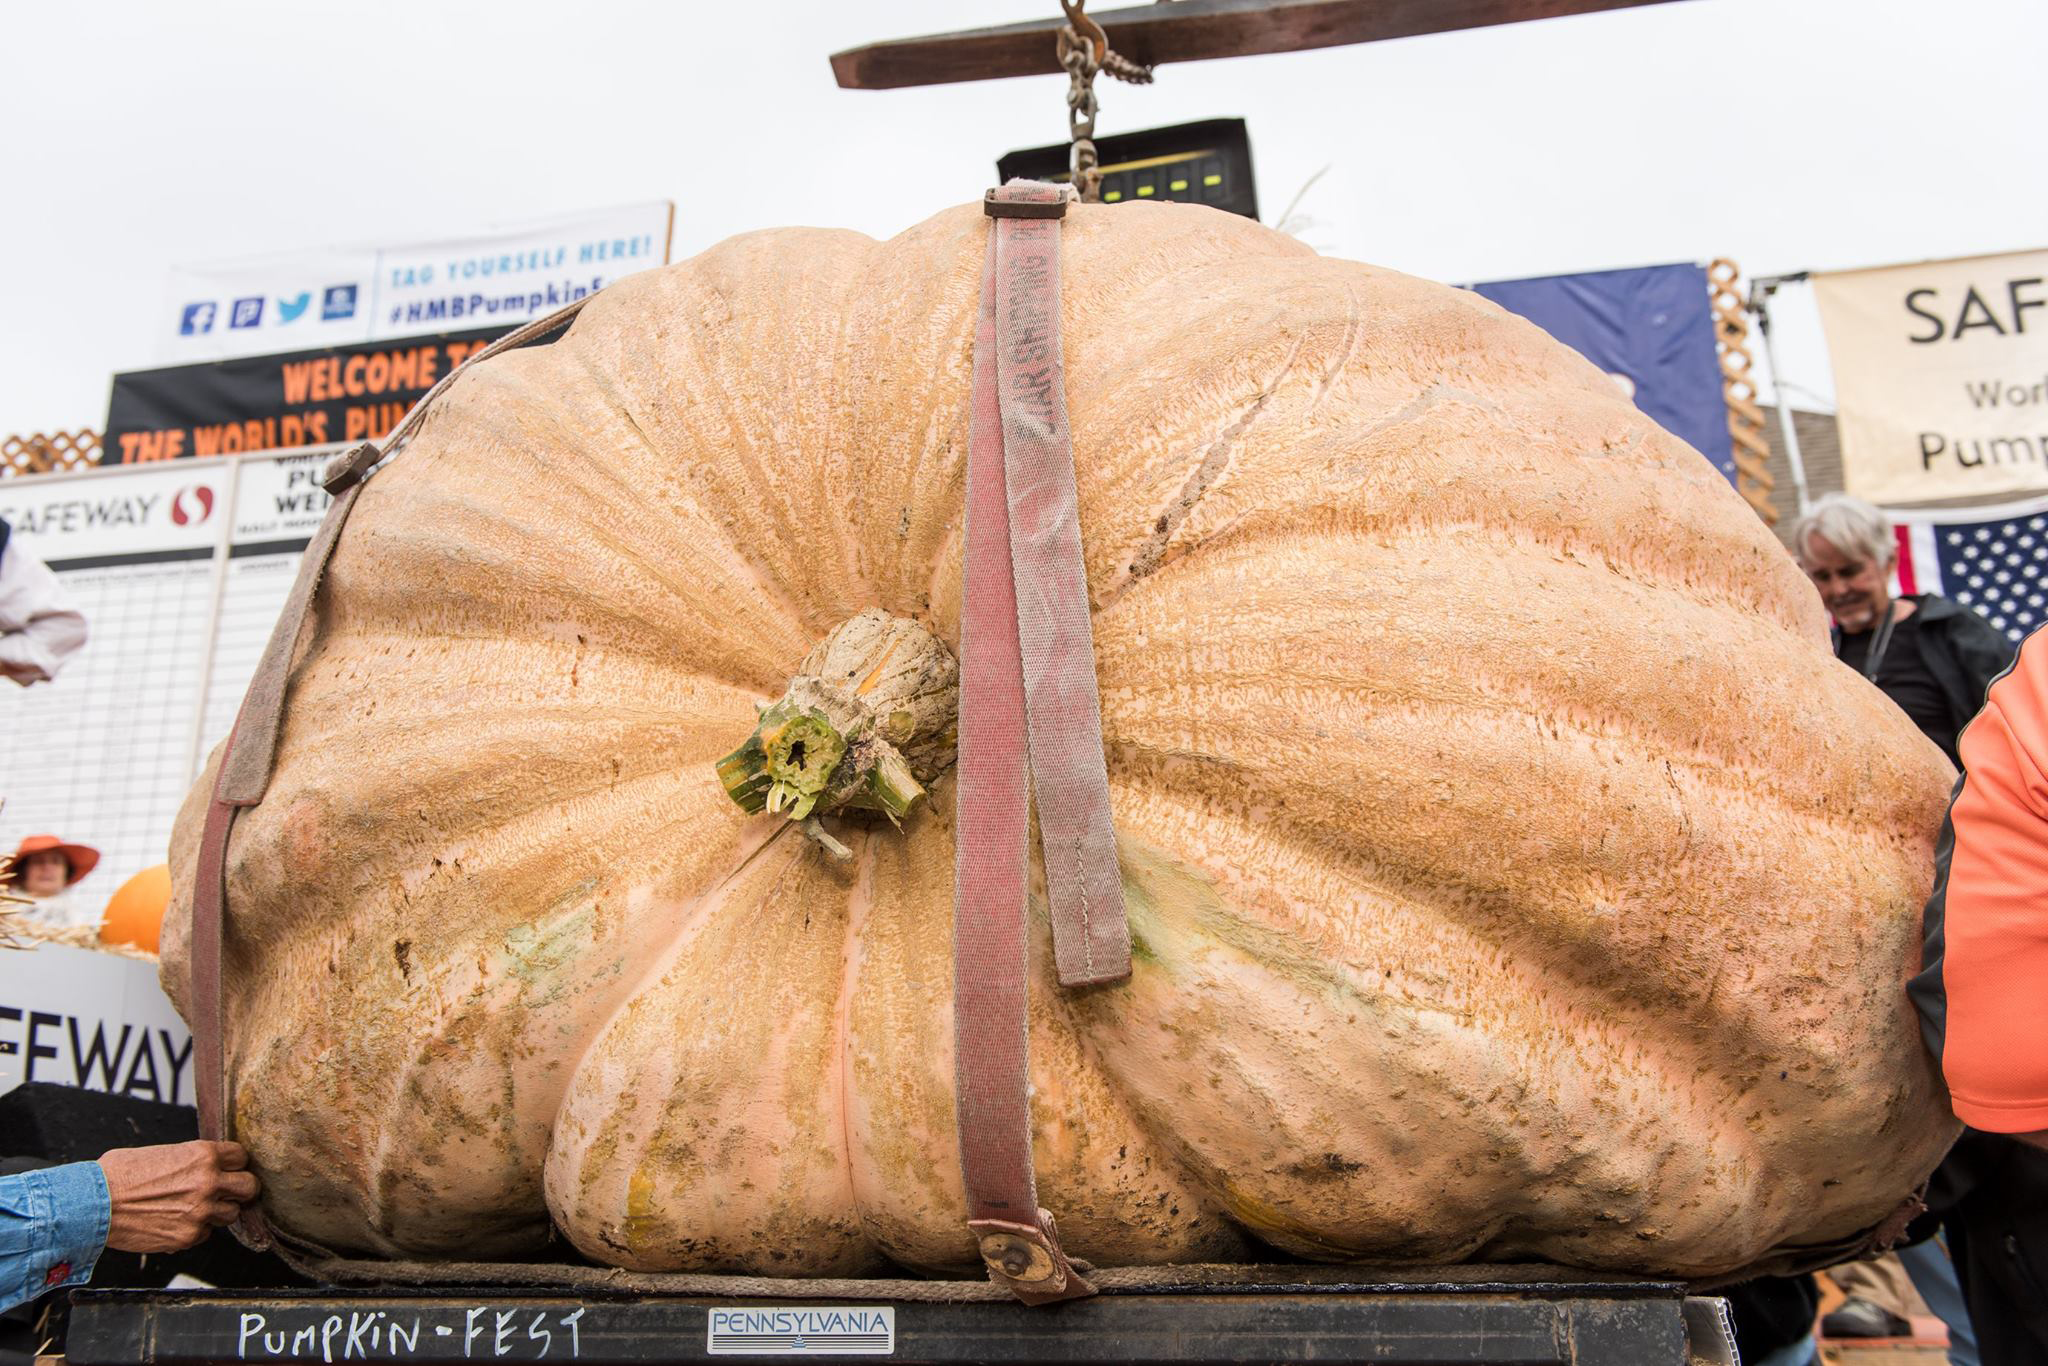 PHOTO: Cindy Tobeck, a third-grade teacher from Washington state, won over $11,000 for her 1,910-pound gourd at the 43rd Annual Safeway World Championship Pumpkin Weigh-Off in Half Moon Bay, California, Oct. 10, 2016. 